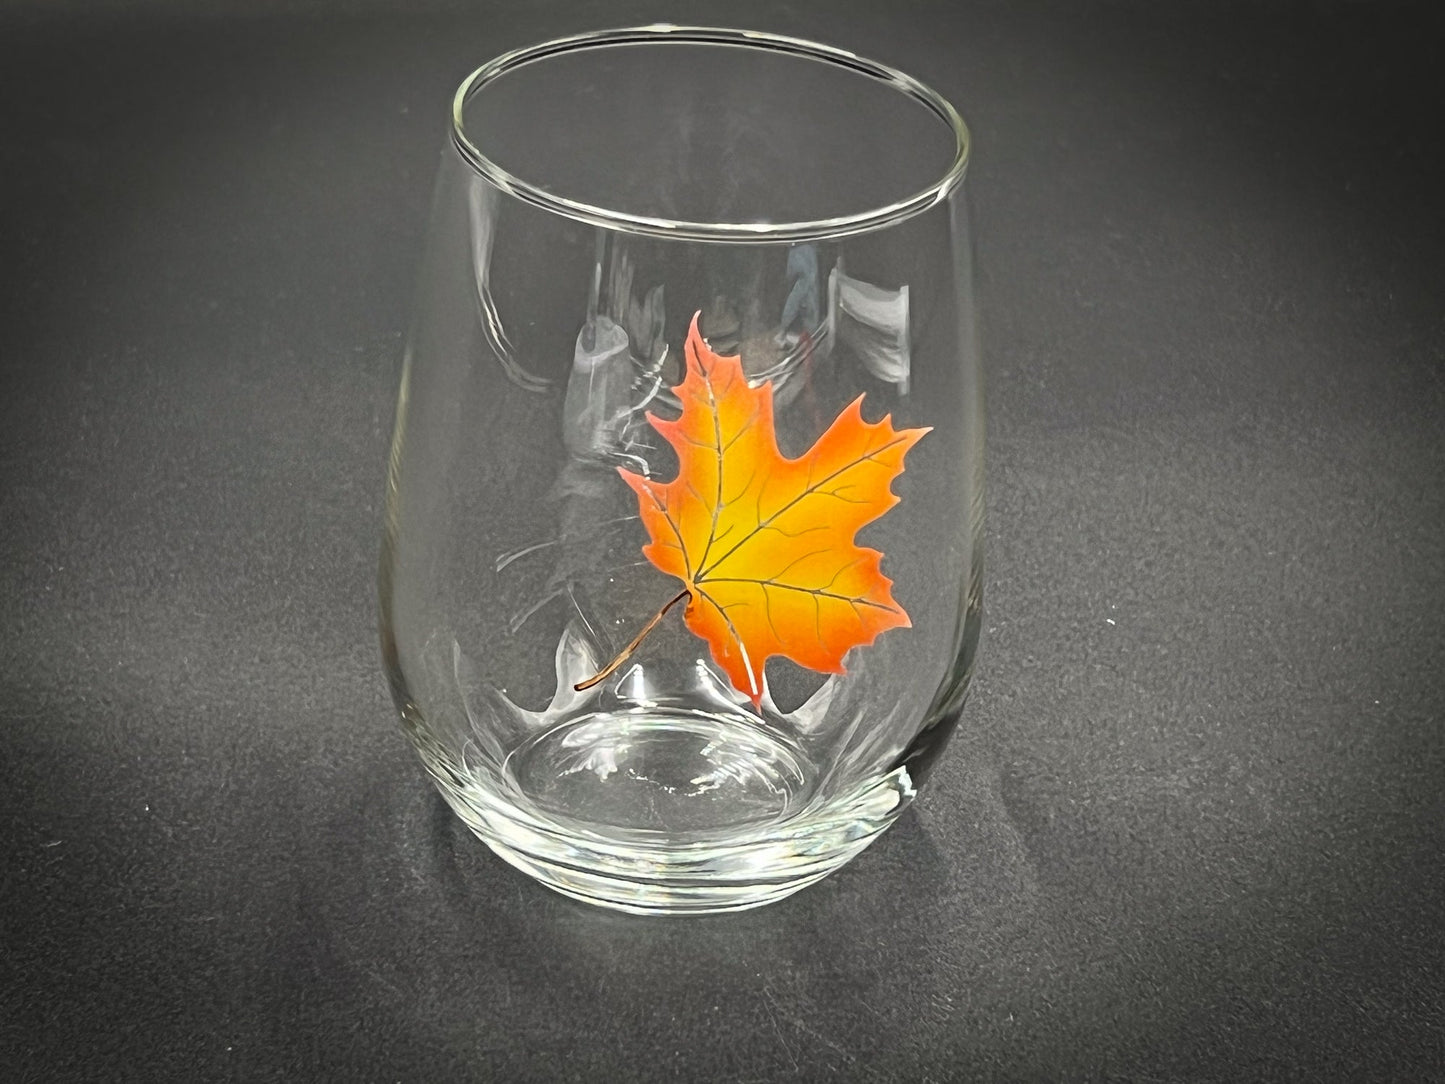 Fall Maple Leaf Engraved and Painted - 21 oz Stemless Wine Glass